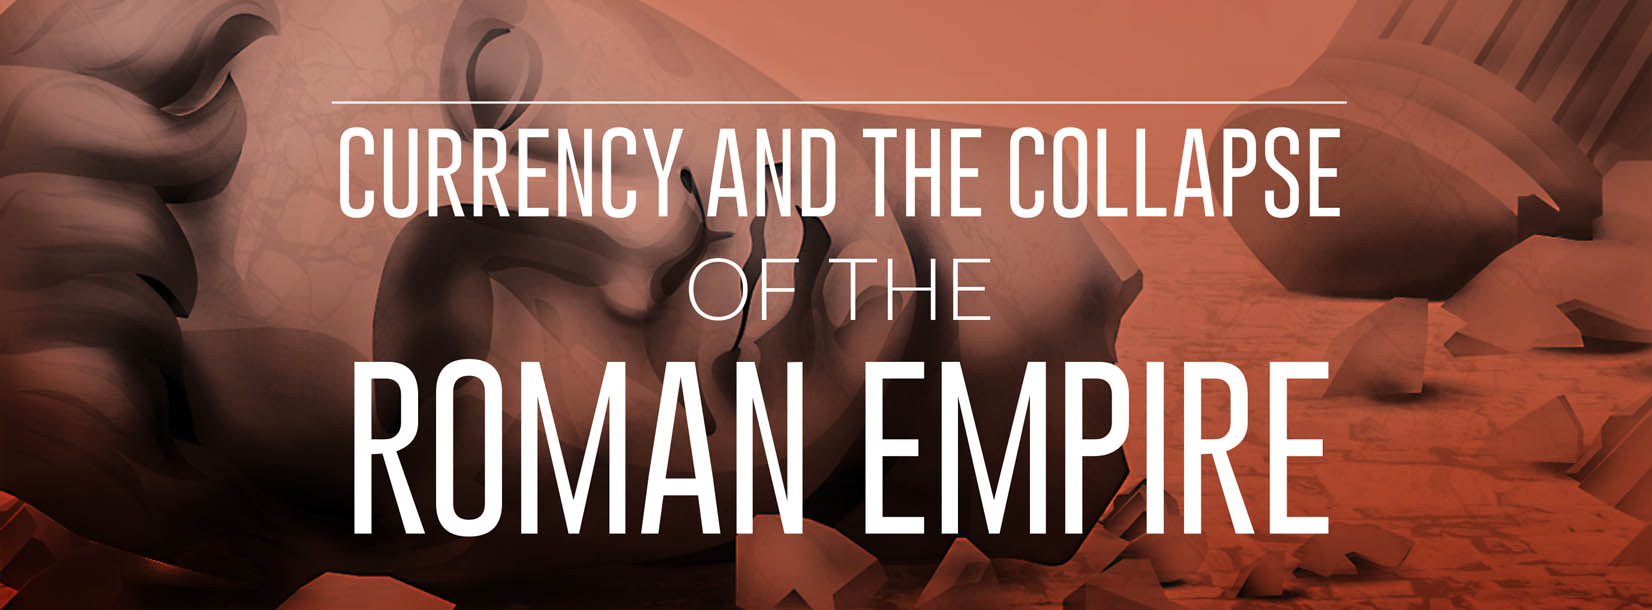 Currency and the Collapse of the Roman Empire (Infographic)